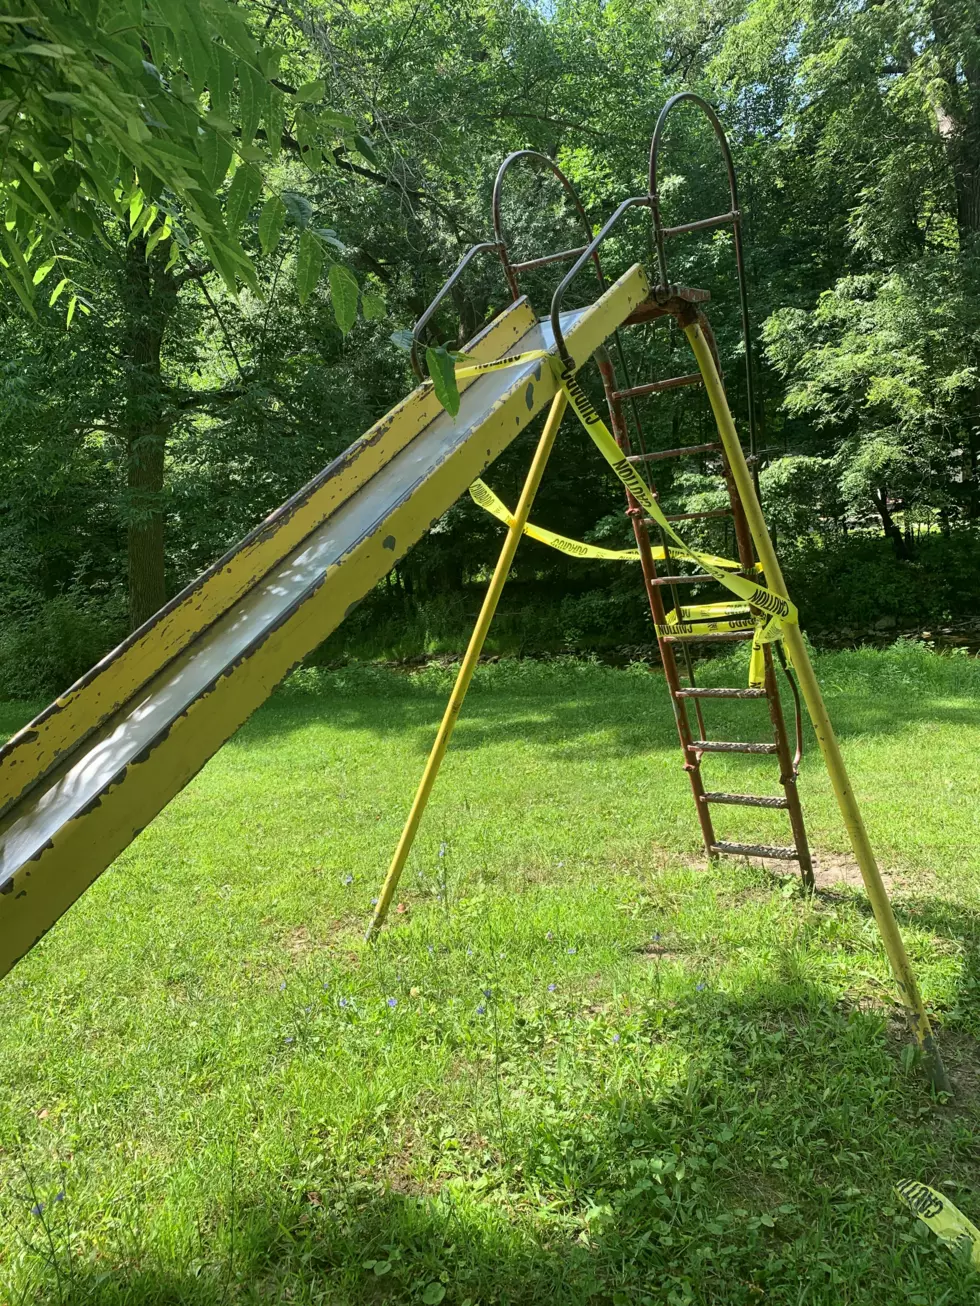 If You Know This Playground Equipment Than You Were Born By 1975